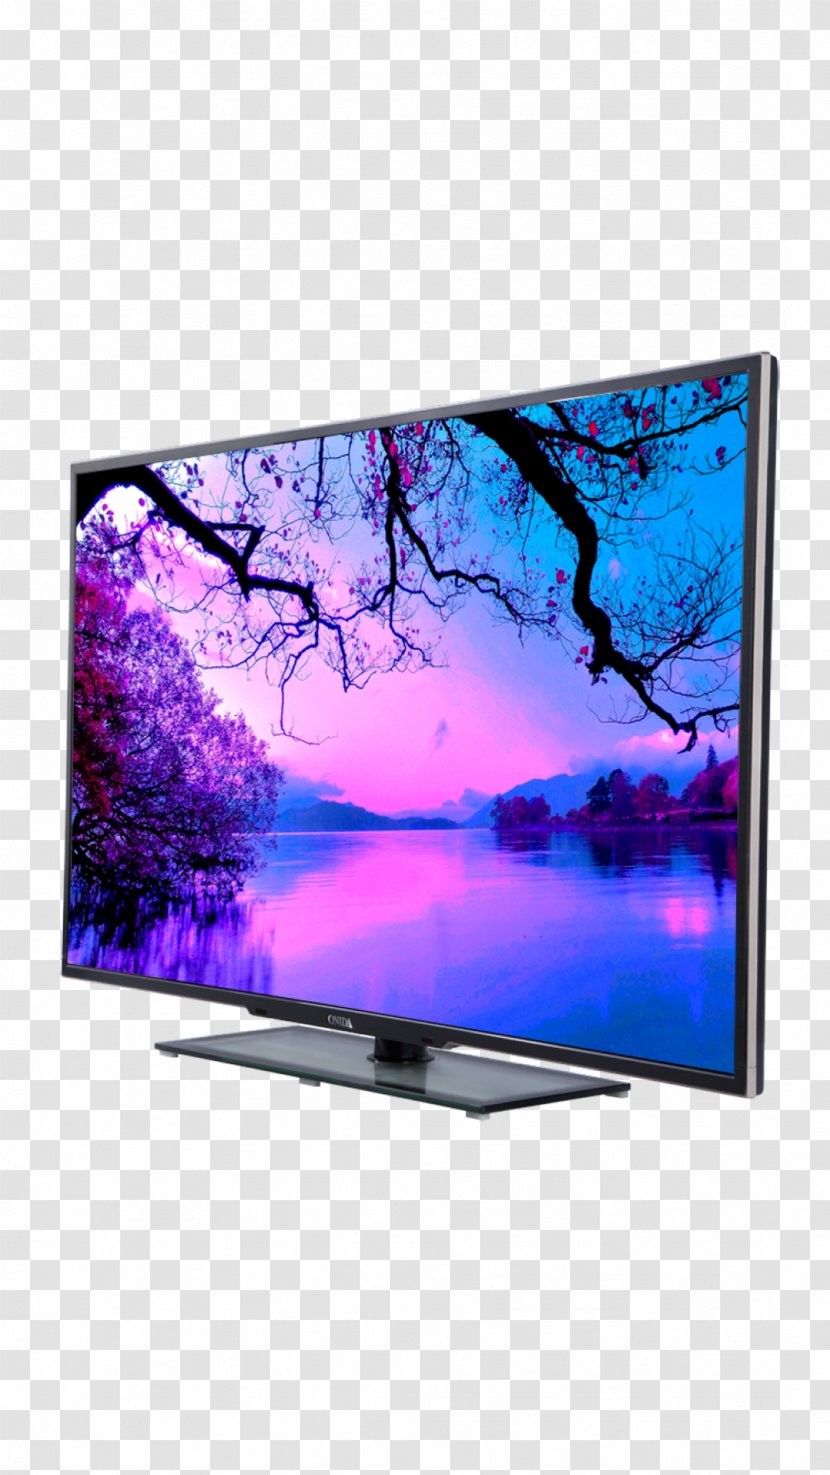 Television Set Display Device LCD Flat Panel - Liquidcrystal - Tv Transparent PNG